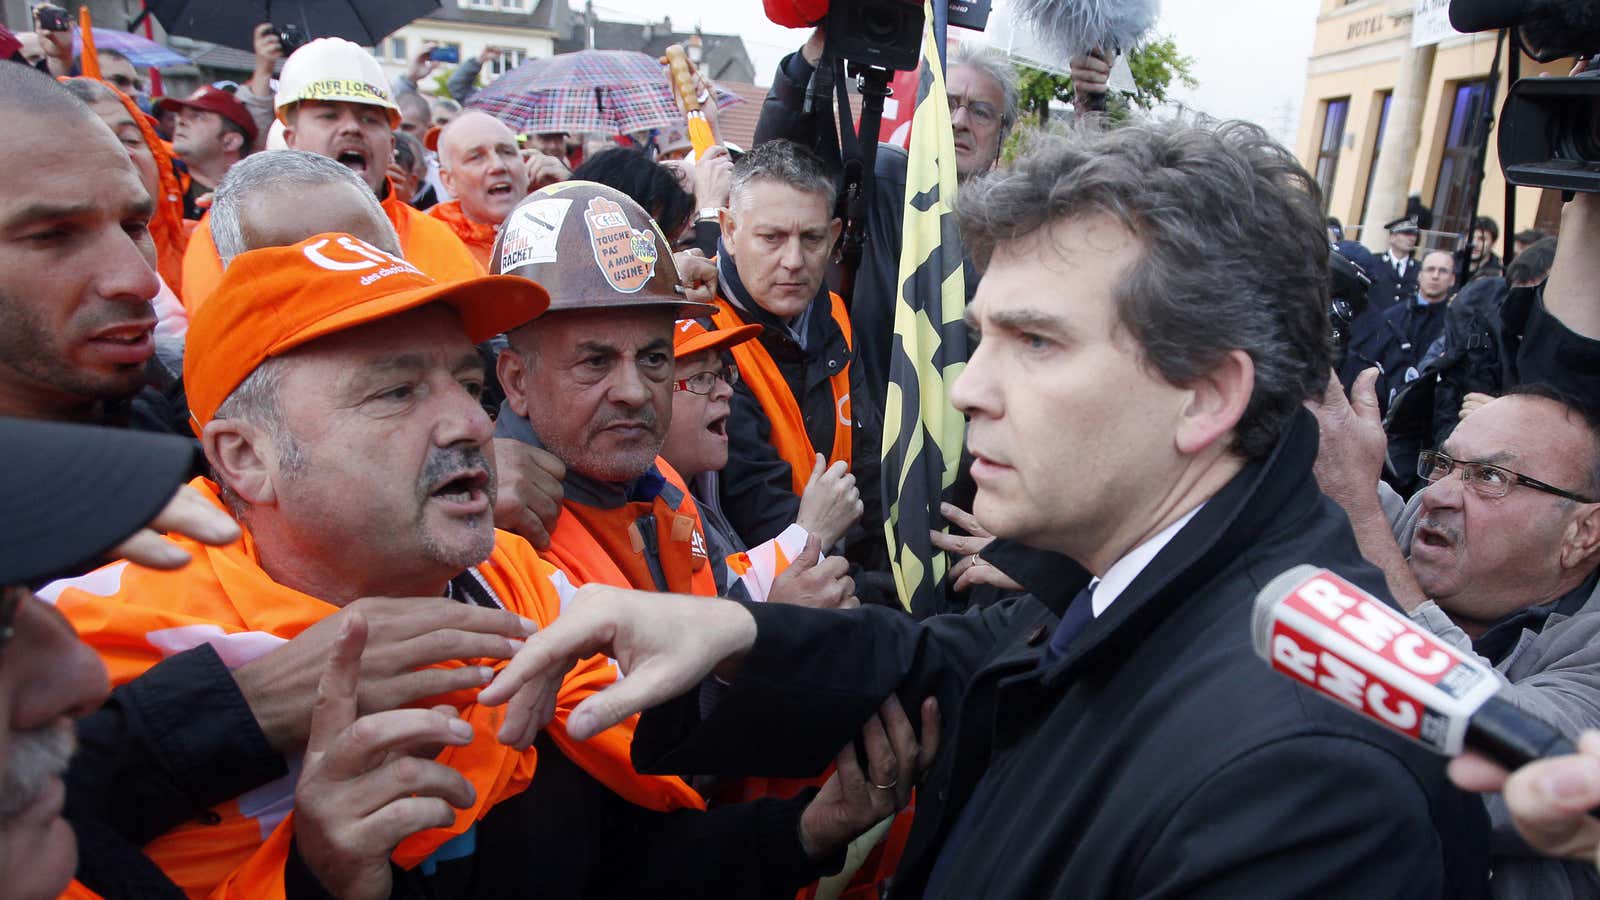 French minister Montebourg to ArcelorMittal workers: “Don’t blame me!”